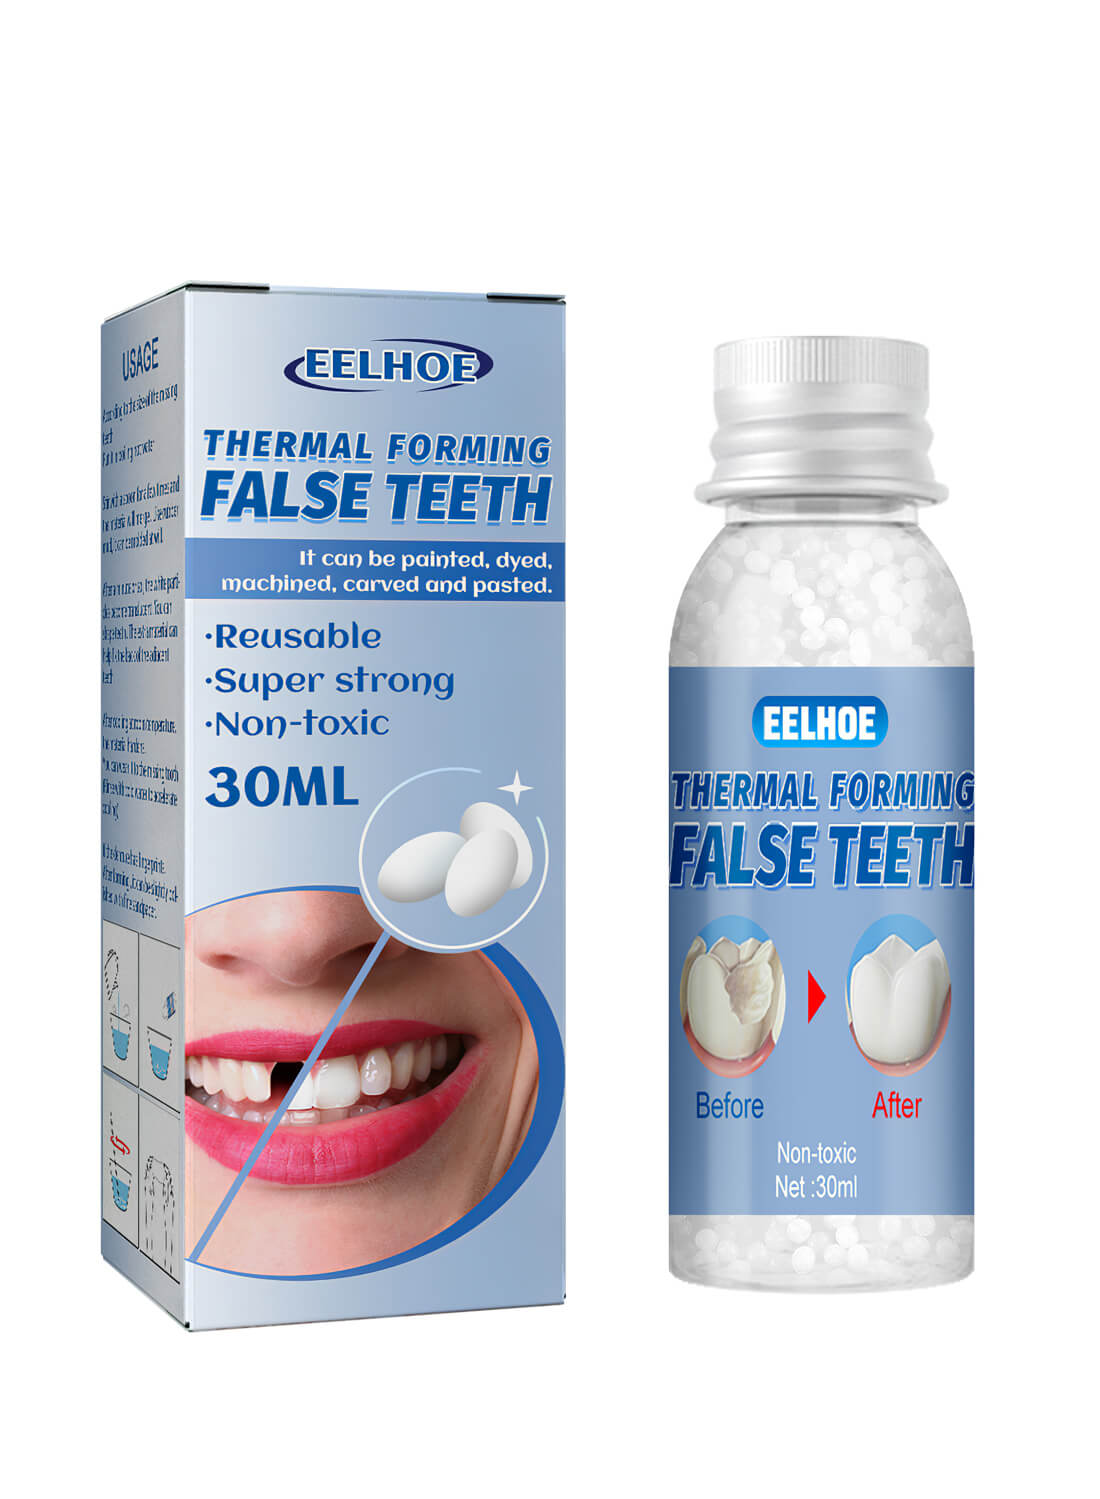 Tooth Repair Kit, Moldable Dental Care Kit for Fixing The Missing and  Broken Replacements, Temporary Filling Fake Teeth DIY at Home, Restoring  Your Confident Smile at Rs 2548.00